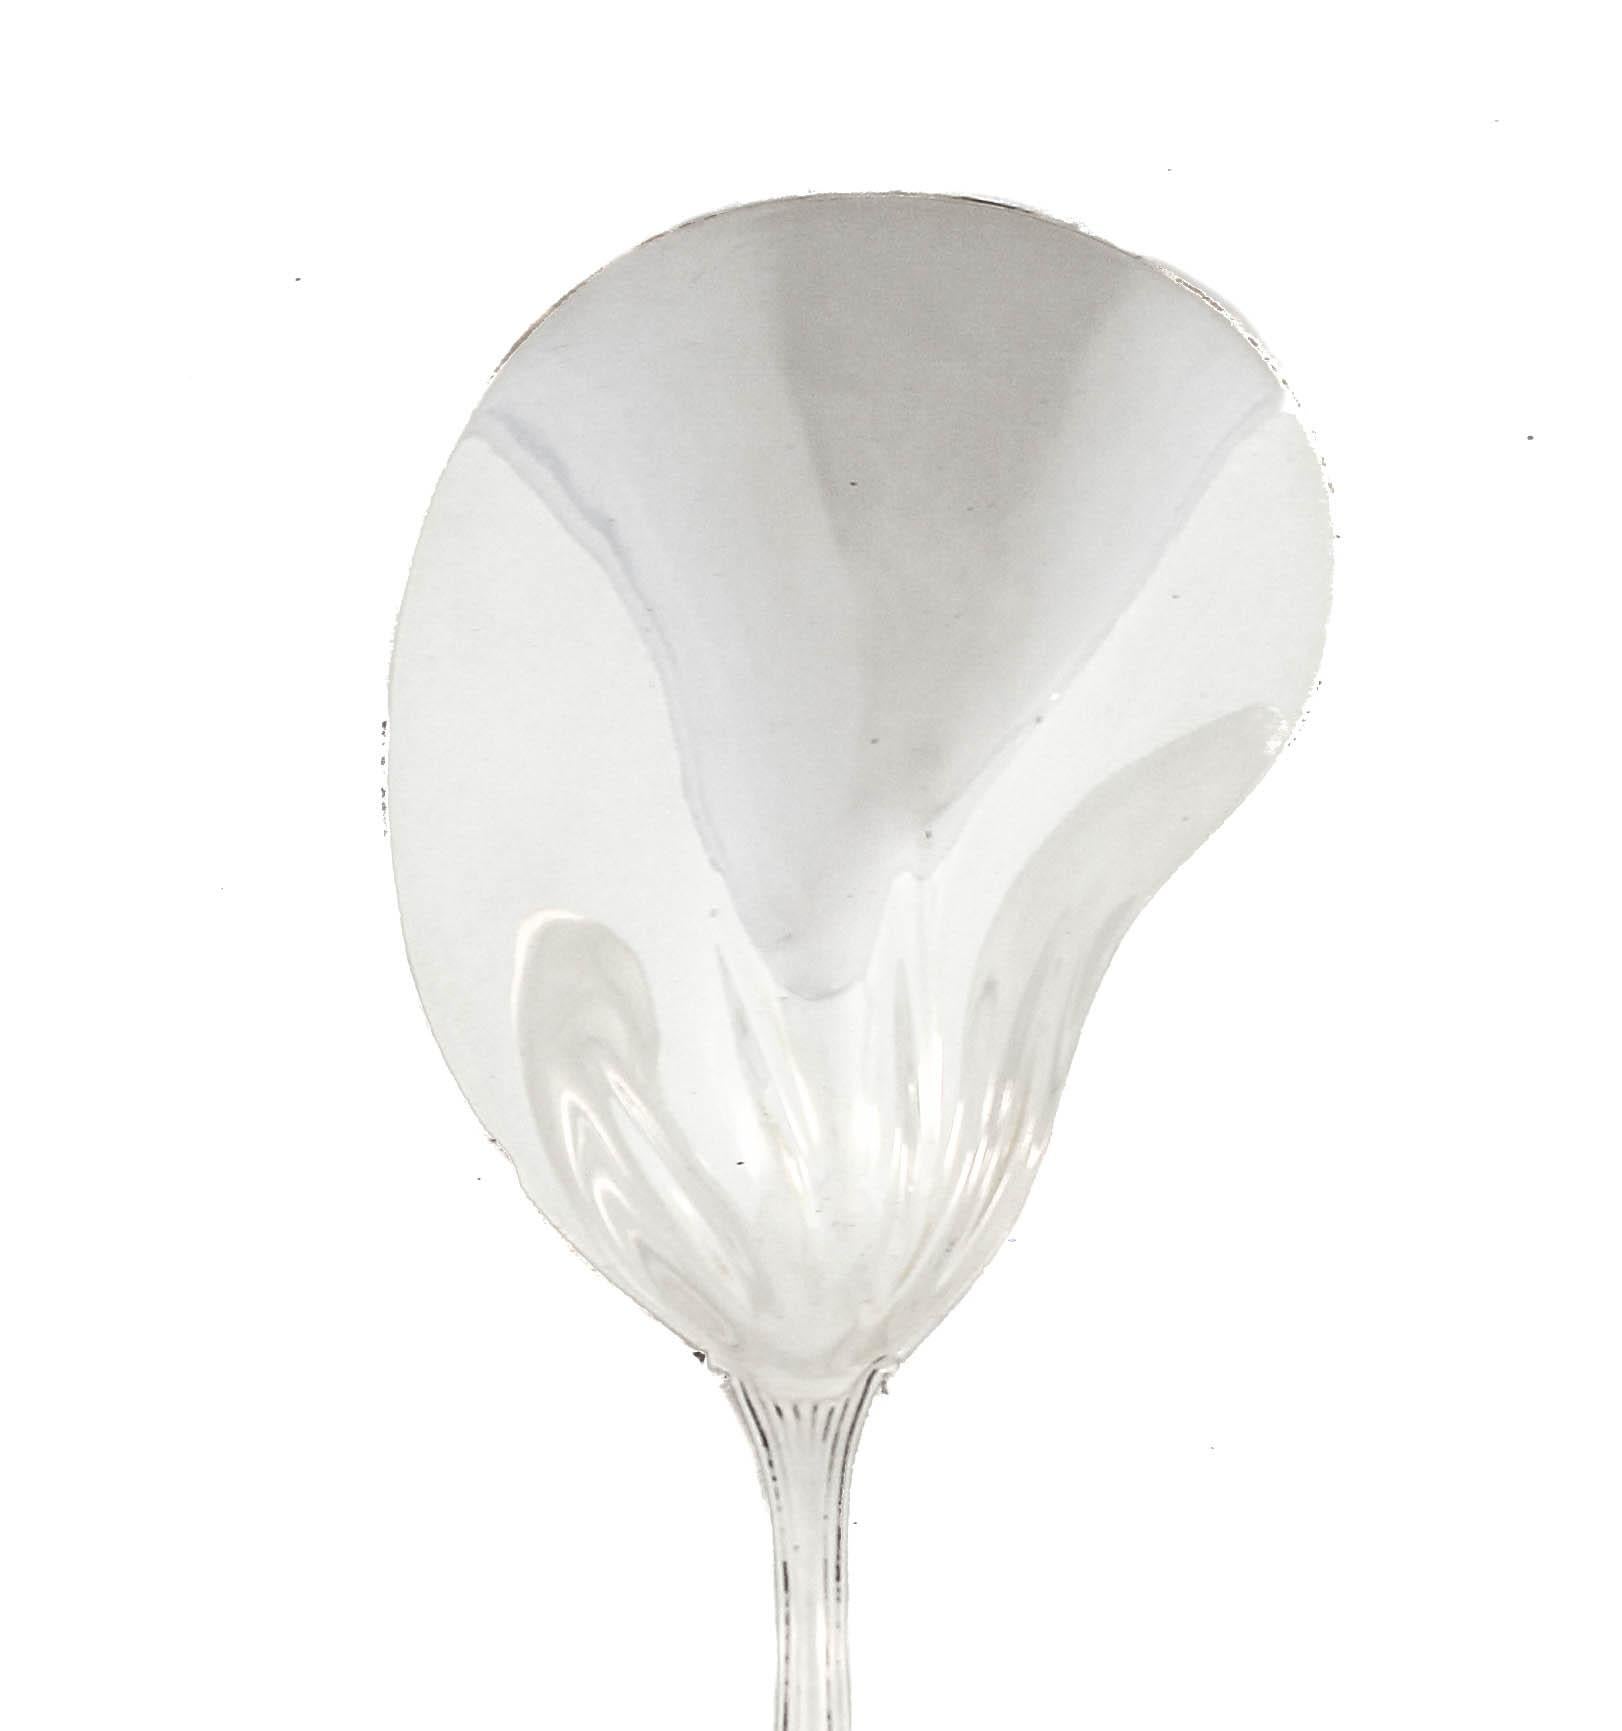 Being offered is a sterling silver master oyster server in the “Florentine” pattern by the world renowned Tiffany & Company.  The handle has a beautifully decorated pattern and the bowl is kidney shaped, smooth and not reticulated.  An exceptional